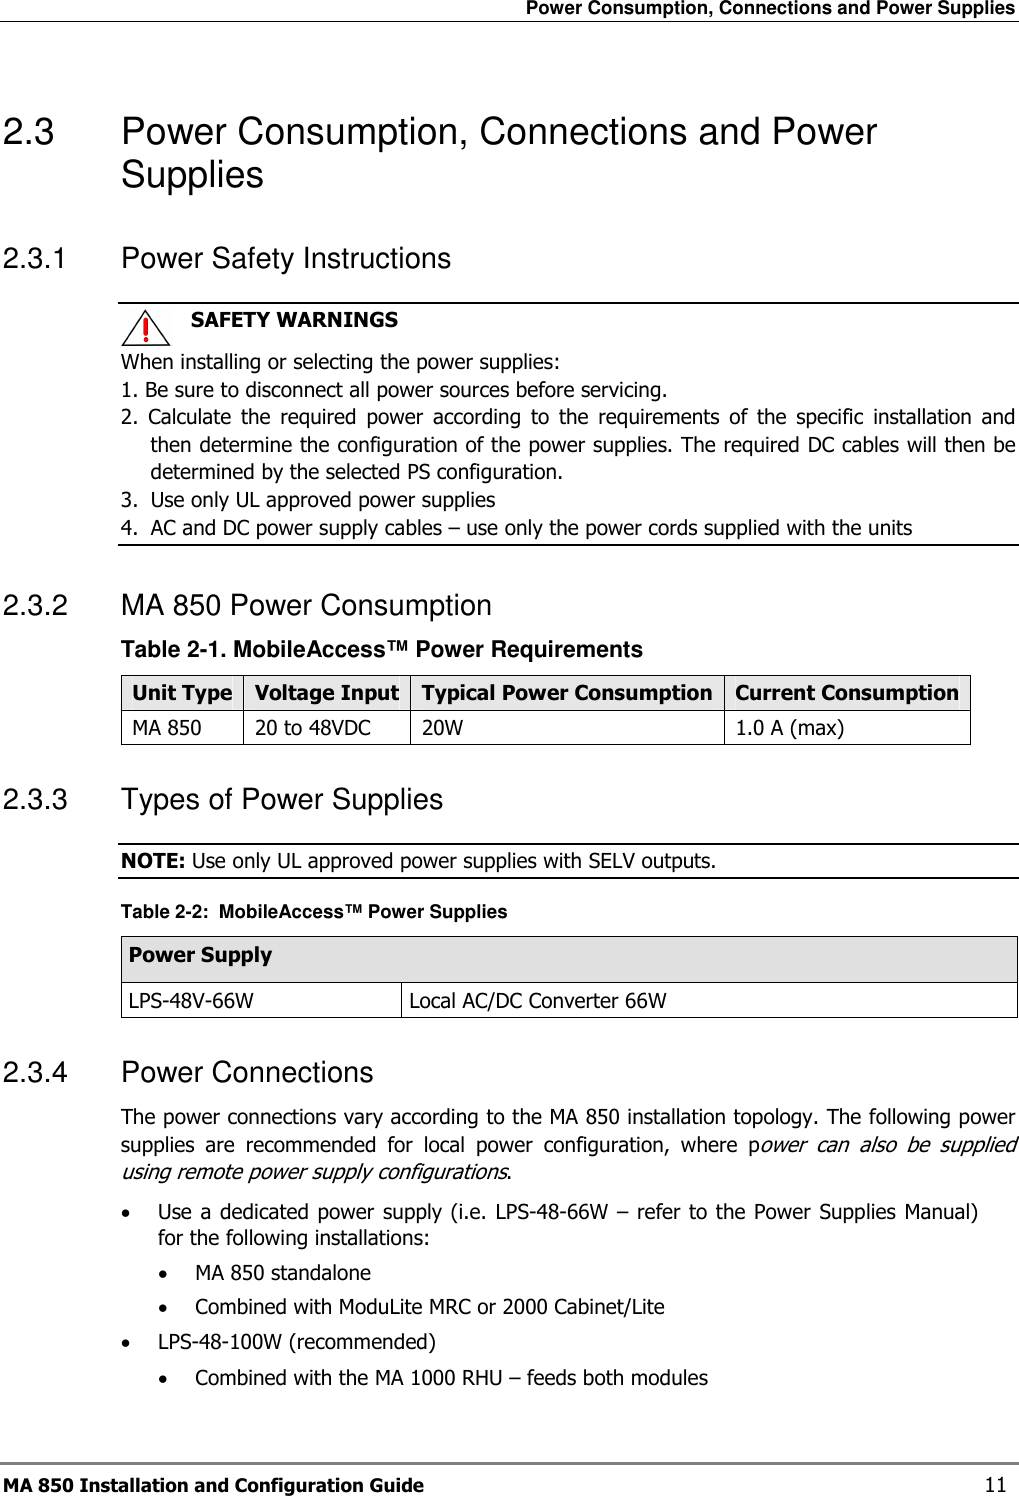 Power Consumption, Connections and Power Supplies MA 850 Installation and Configuration Guide    11 2.3  Power Consumption, Connections and Power Supplies 2.3.1  Power Safety Instructions    SAFETY WARNINGS When installing or selecting the power supplies:   1. Be sure to disconnect all power sources before servicing. 2.  Calculate  the  required  power  according  to  the  requirements  of  the  specific  installation  and then determine the configuration of the power supplies. The required DC cables will then be determined by the selected PS configuration. 3.  Use only UL approved power supplies  4.  AC and DC power supply cables – use only the power cords supplied with the units  2.3.2  MA 850 Power Consumption  Table  2-1. MobileAccess™ Power Requirements Unit Type Voltage Input Typical Power Consumption Current Consumption MA 850  20 to 48VDC  20W  1.0 A (max) 2.3.3  Types of Power Supplies NOTE: Use only UL approved power supplies with SELV outputs. Table  2-2:  MobileAccess™ Power Supplies Power Supply LPS-48V-66W  Local AC/DC Converter 66W  2.3.4  Power Connections  The power connections vary according to the MA 850 installation topology. The following power supplies  are  recommended  for  local  power  configuration,  where  power  can  also  be  supplied using remote power supply configurations. • Use a dedicated power  supply (i.e. LPS-48-66W – refer to the Power  Supplies Manual) for the following installations: • MA 850 standalone • Combined with ModuLite MRC or 2000 Cabinet/Lite • LPS-48-100W (recommended)  • Combined with the MA 1000 RHU – feeds both modules  